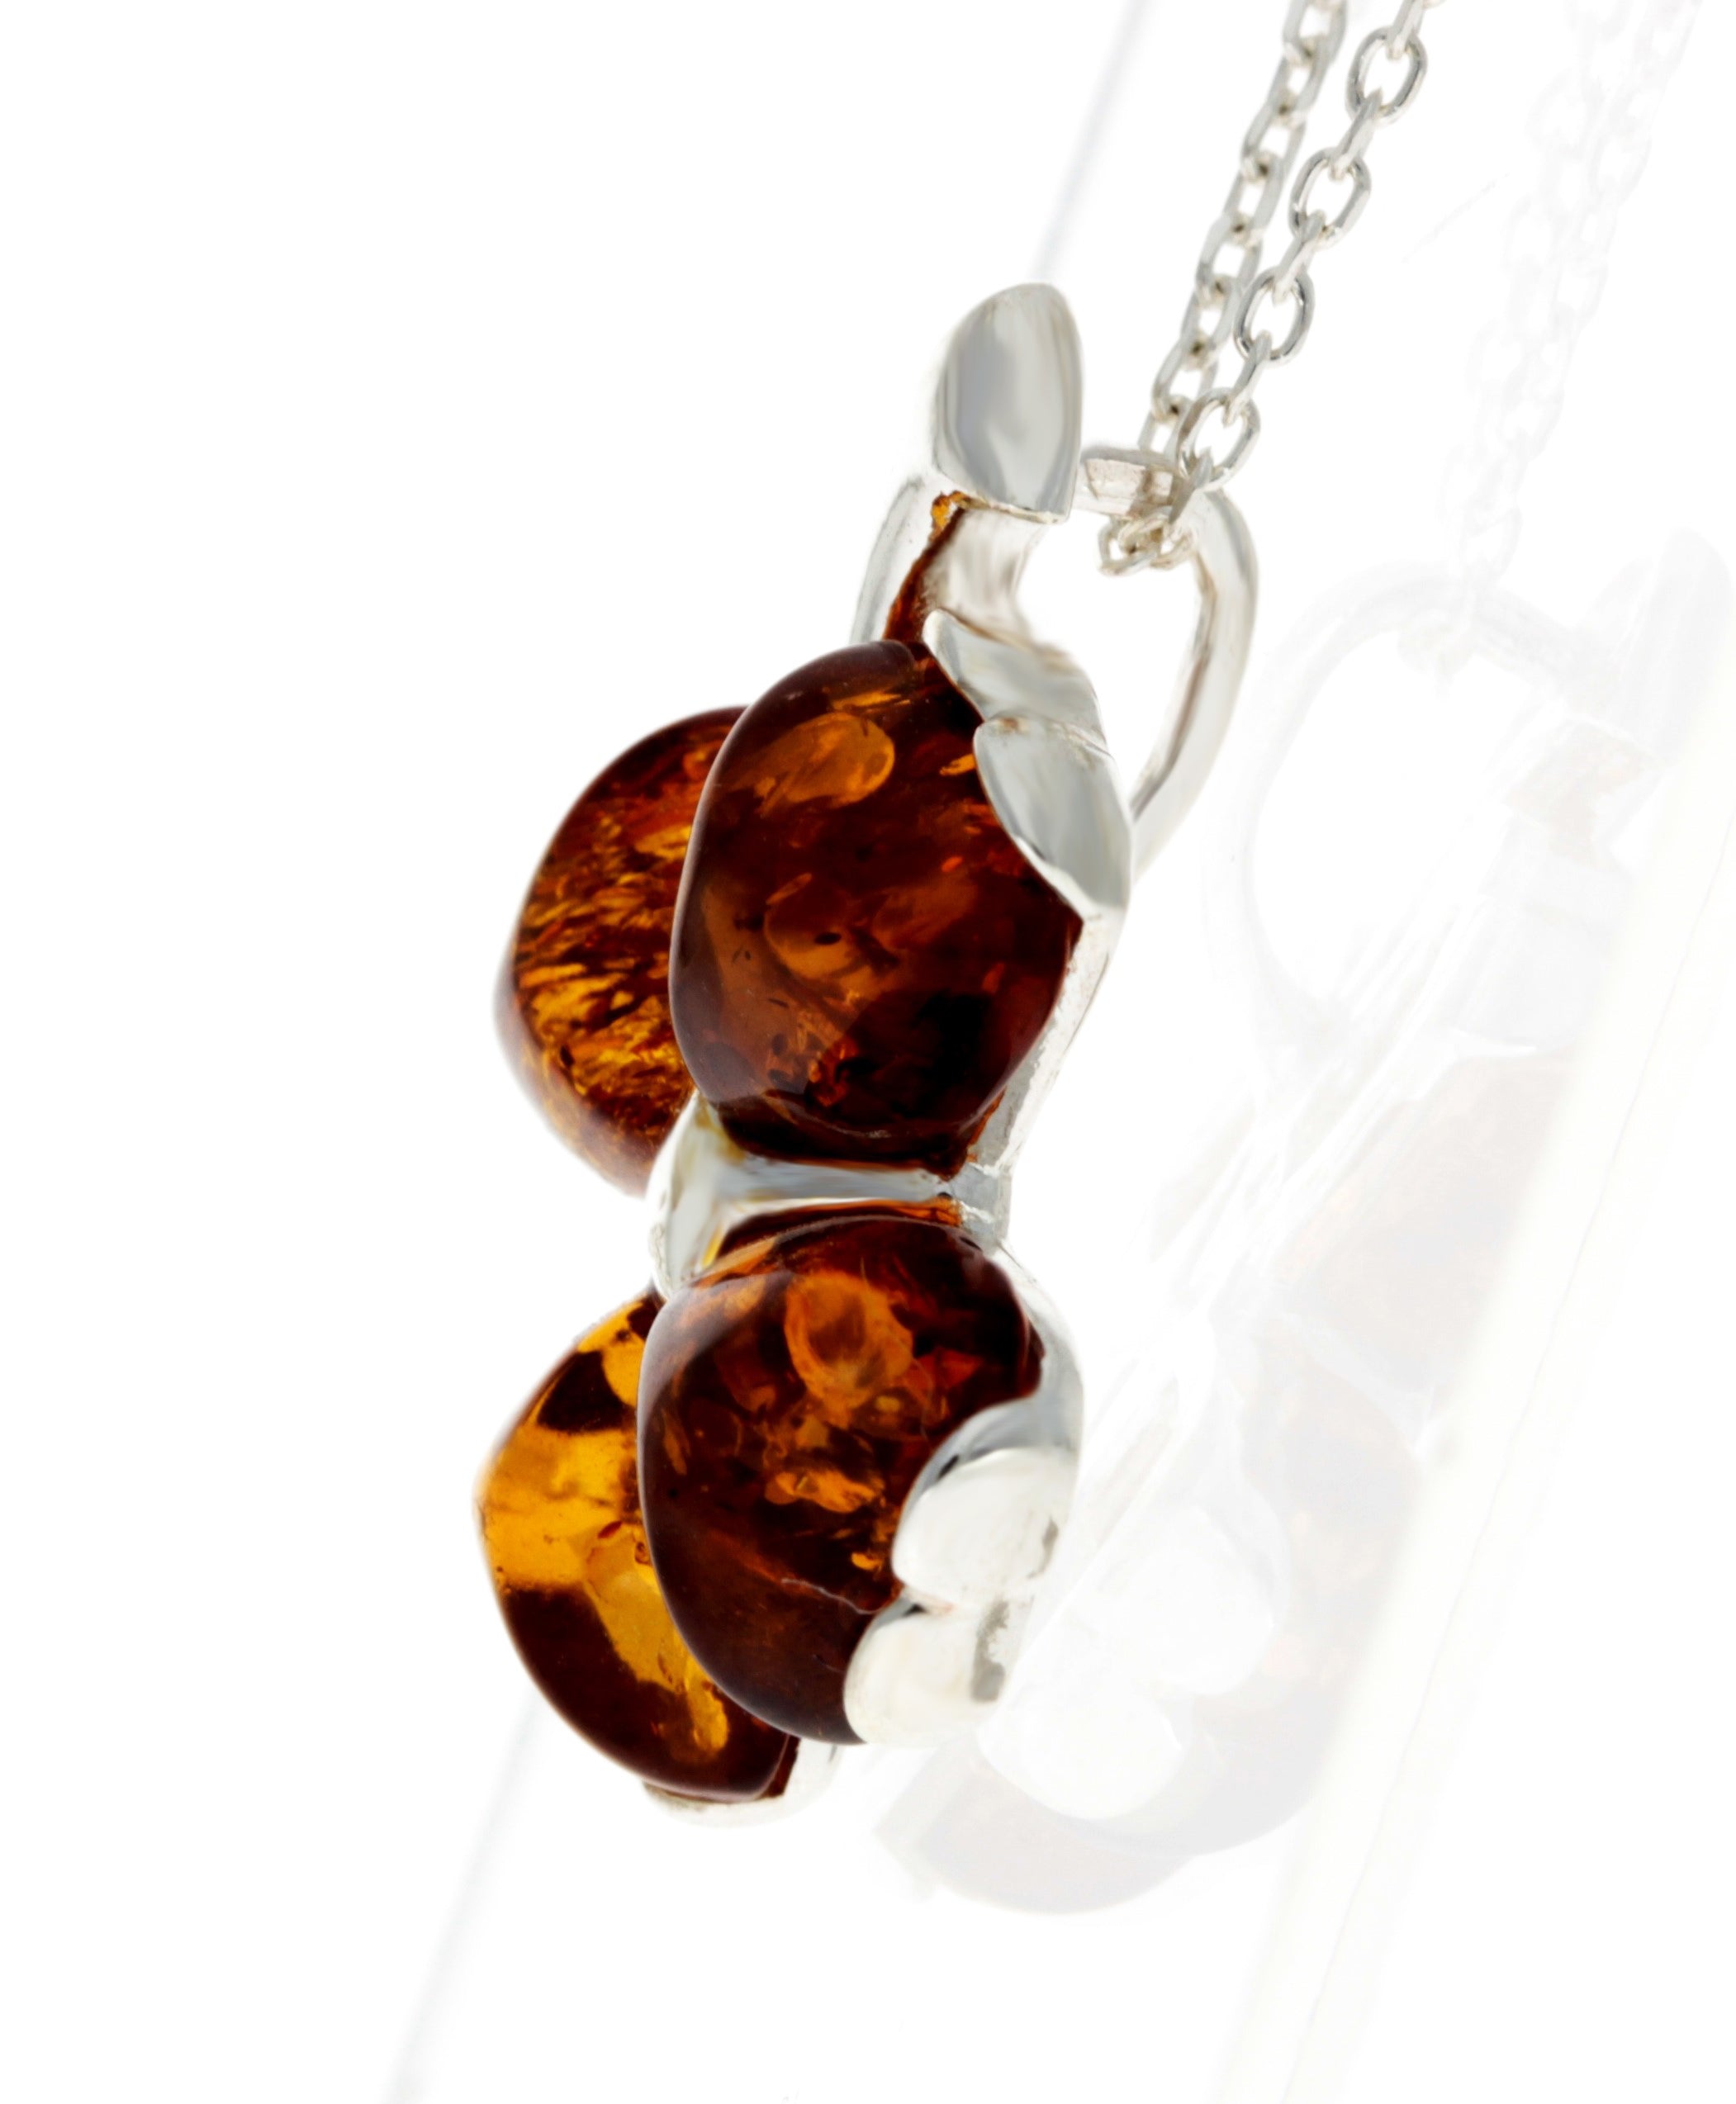 925 Sterling SIlver & Genuine Baltic Amber Lucky Clover Pendant  - GL283